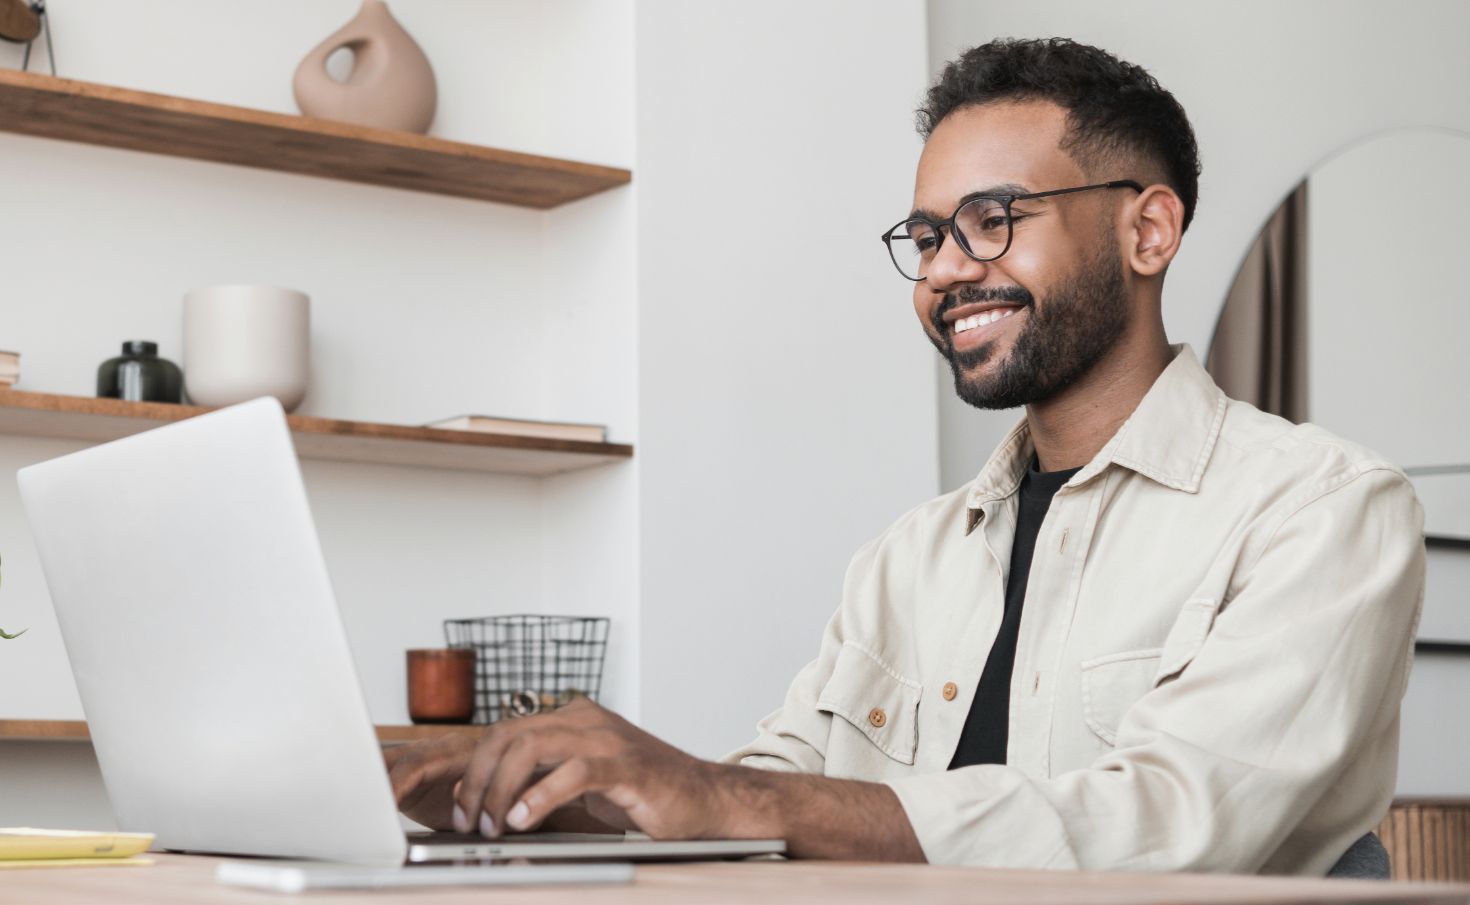 Merchandiser Looking Pleased With Search Results Set